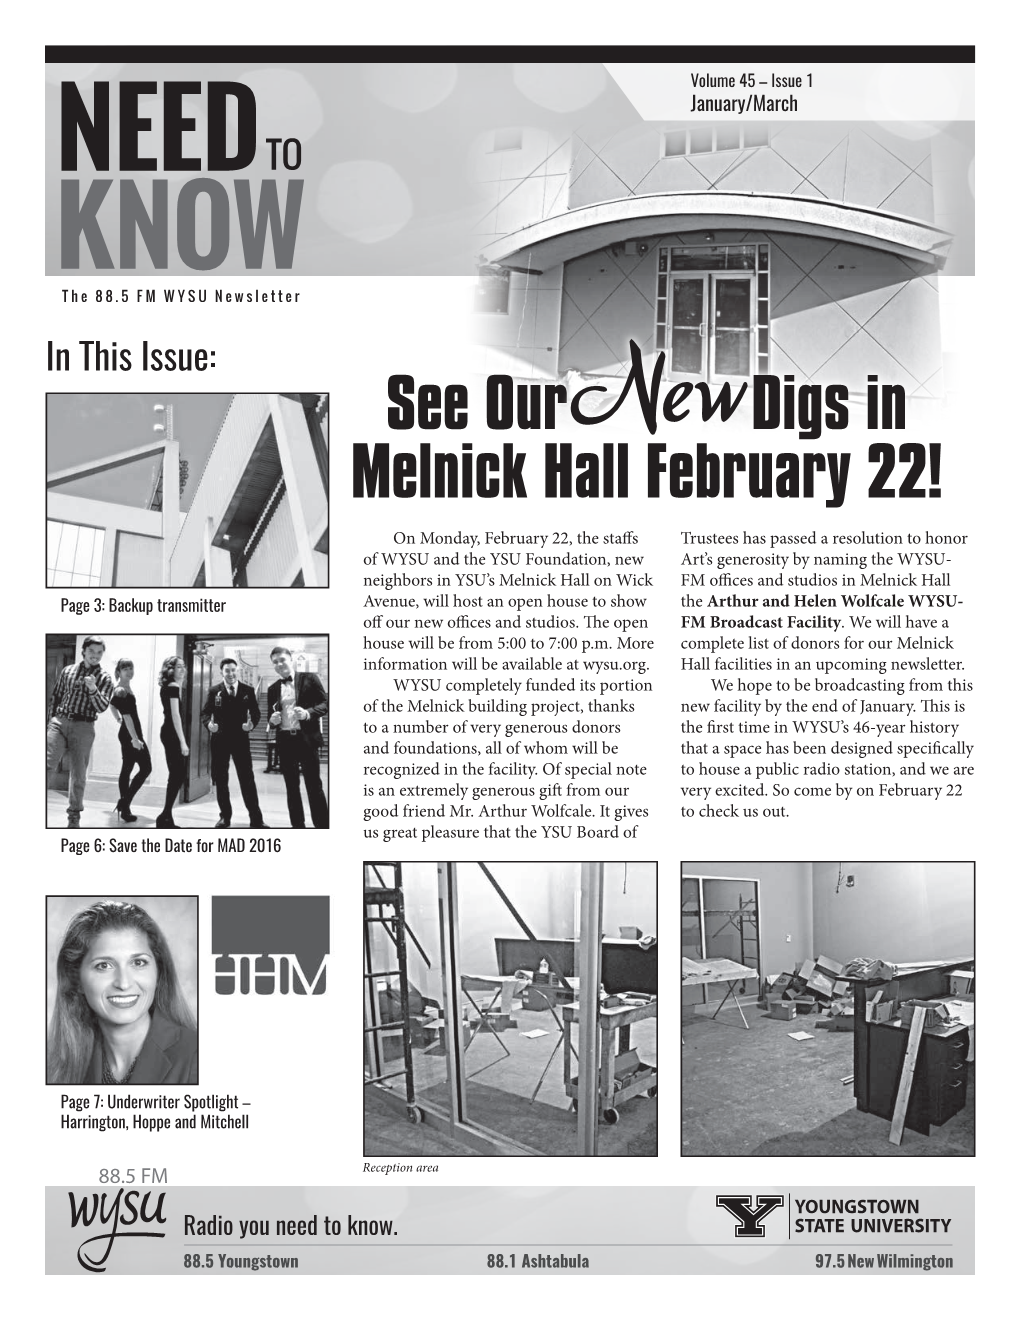 See Our Digs in Melnick Hall February